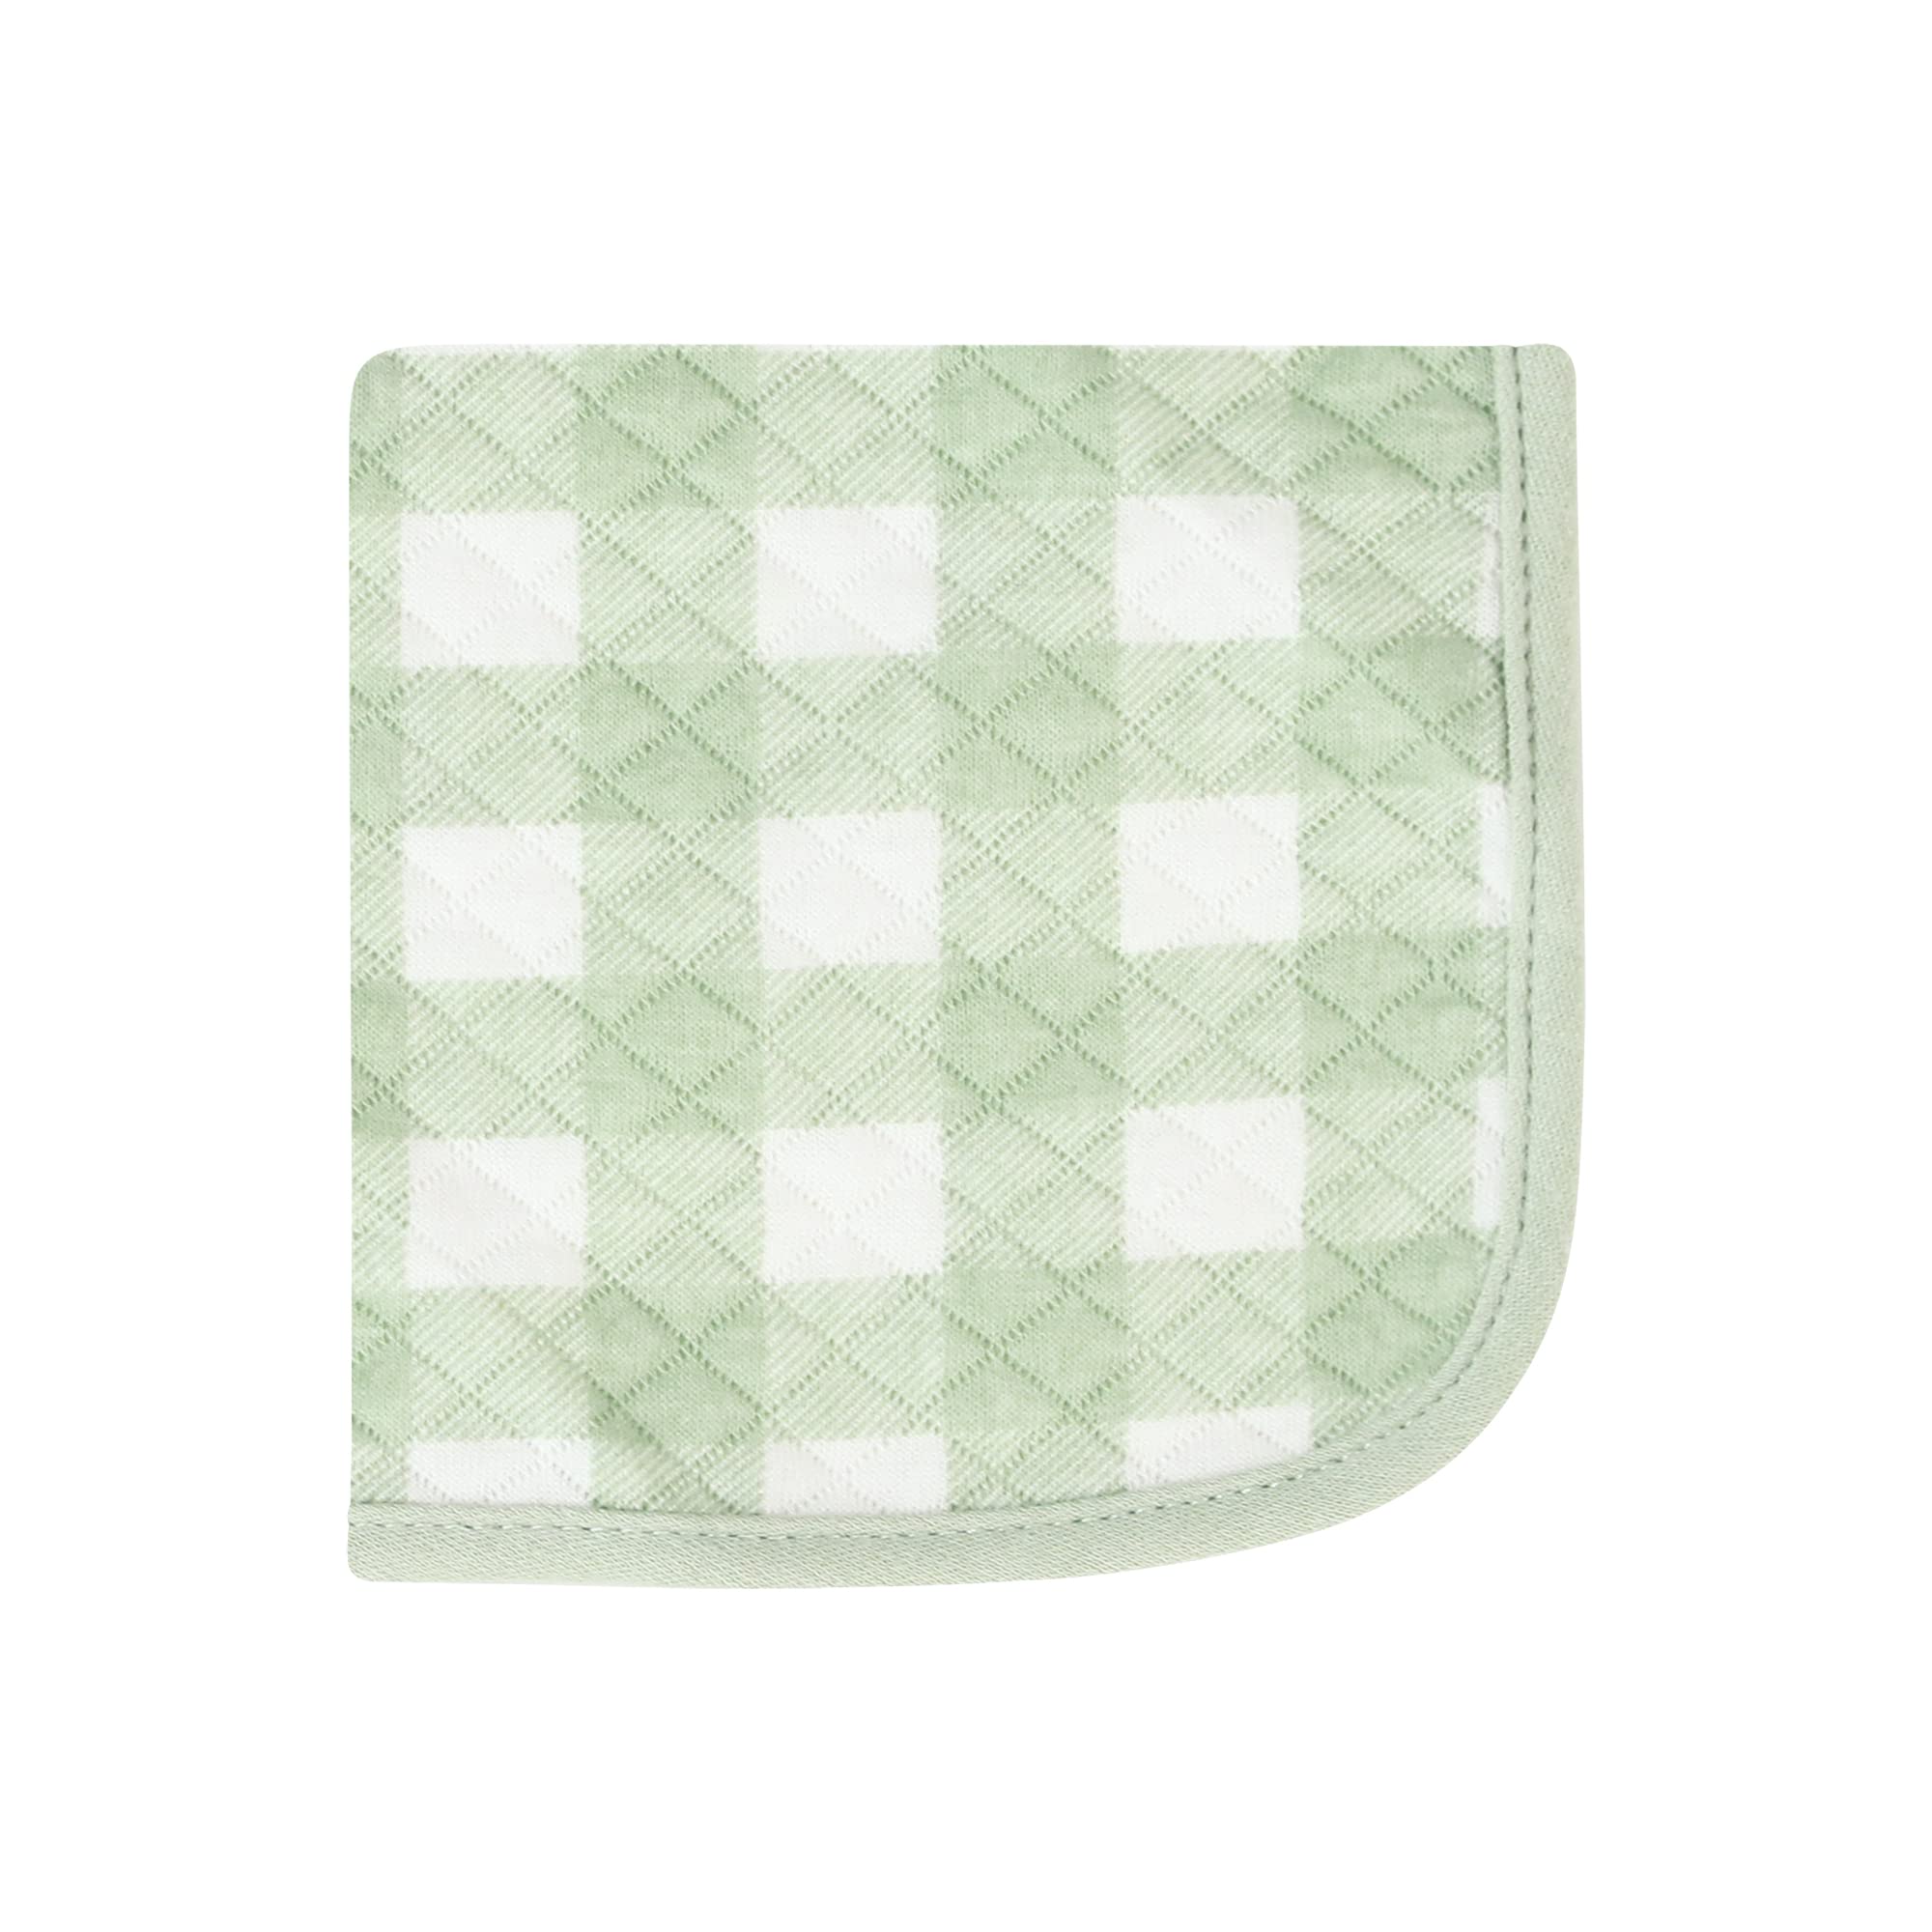 Hudson Baby Unisex Baby Quilted Cotton Washcloths, Forest Animals, One Size